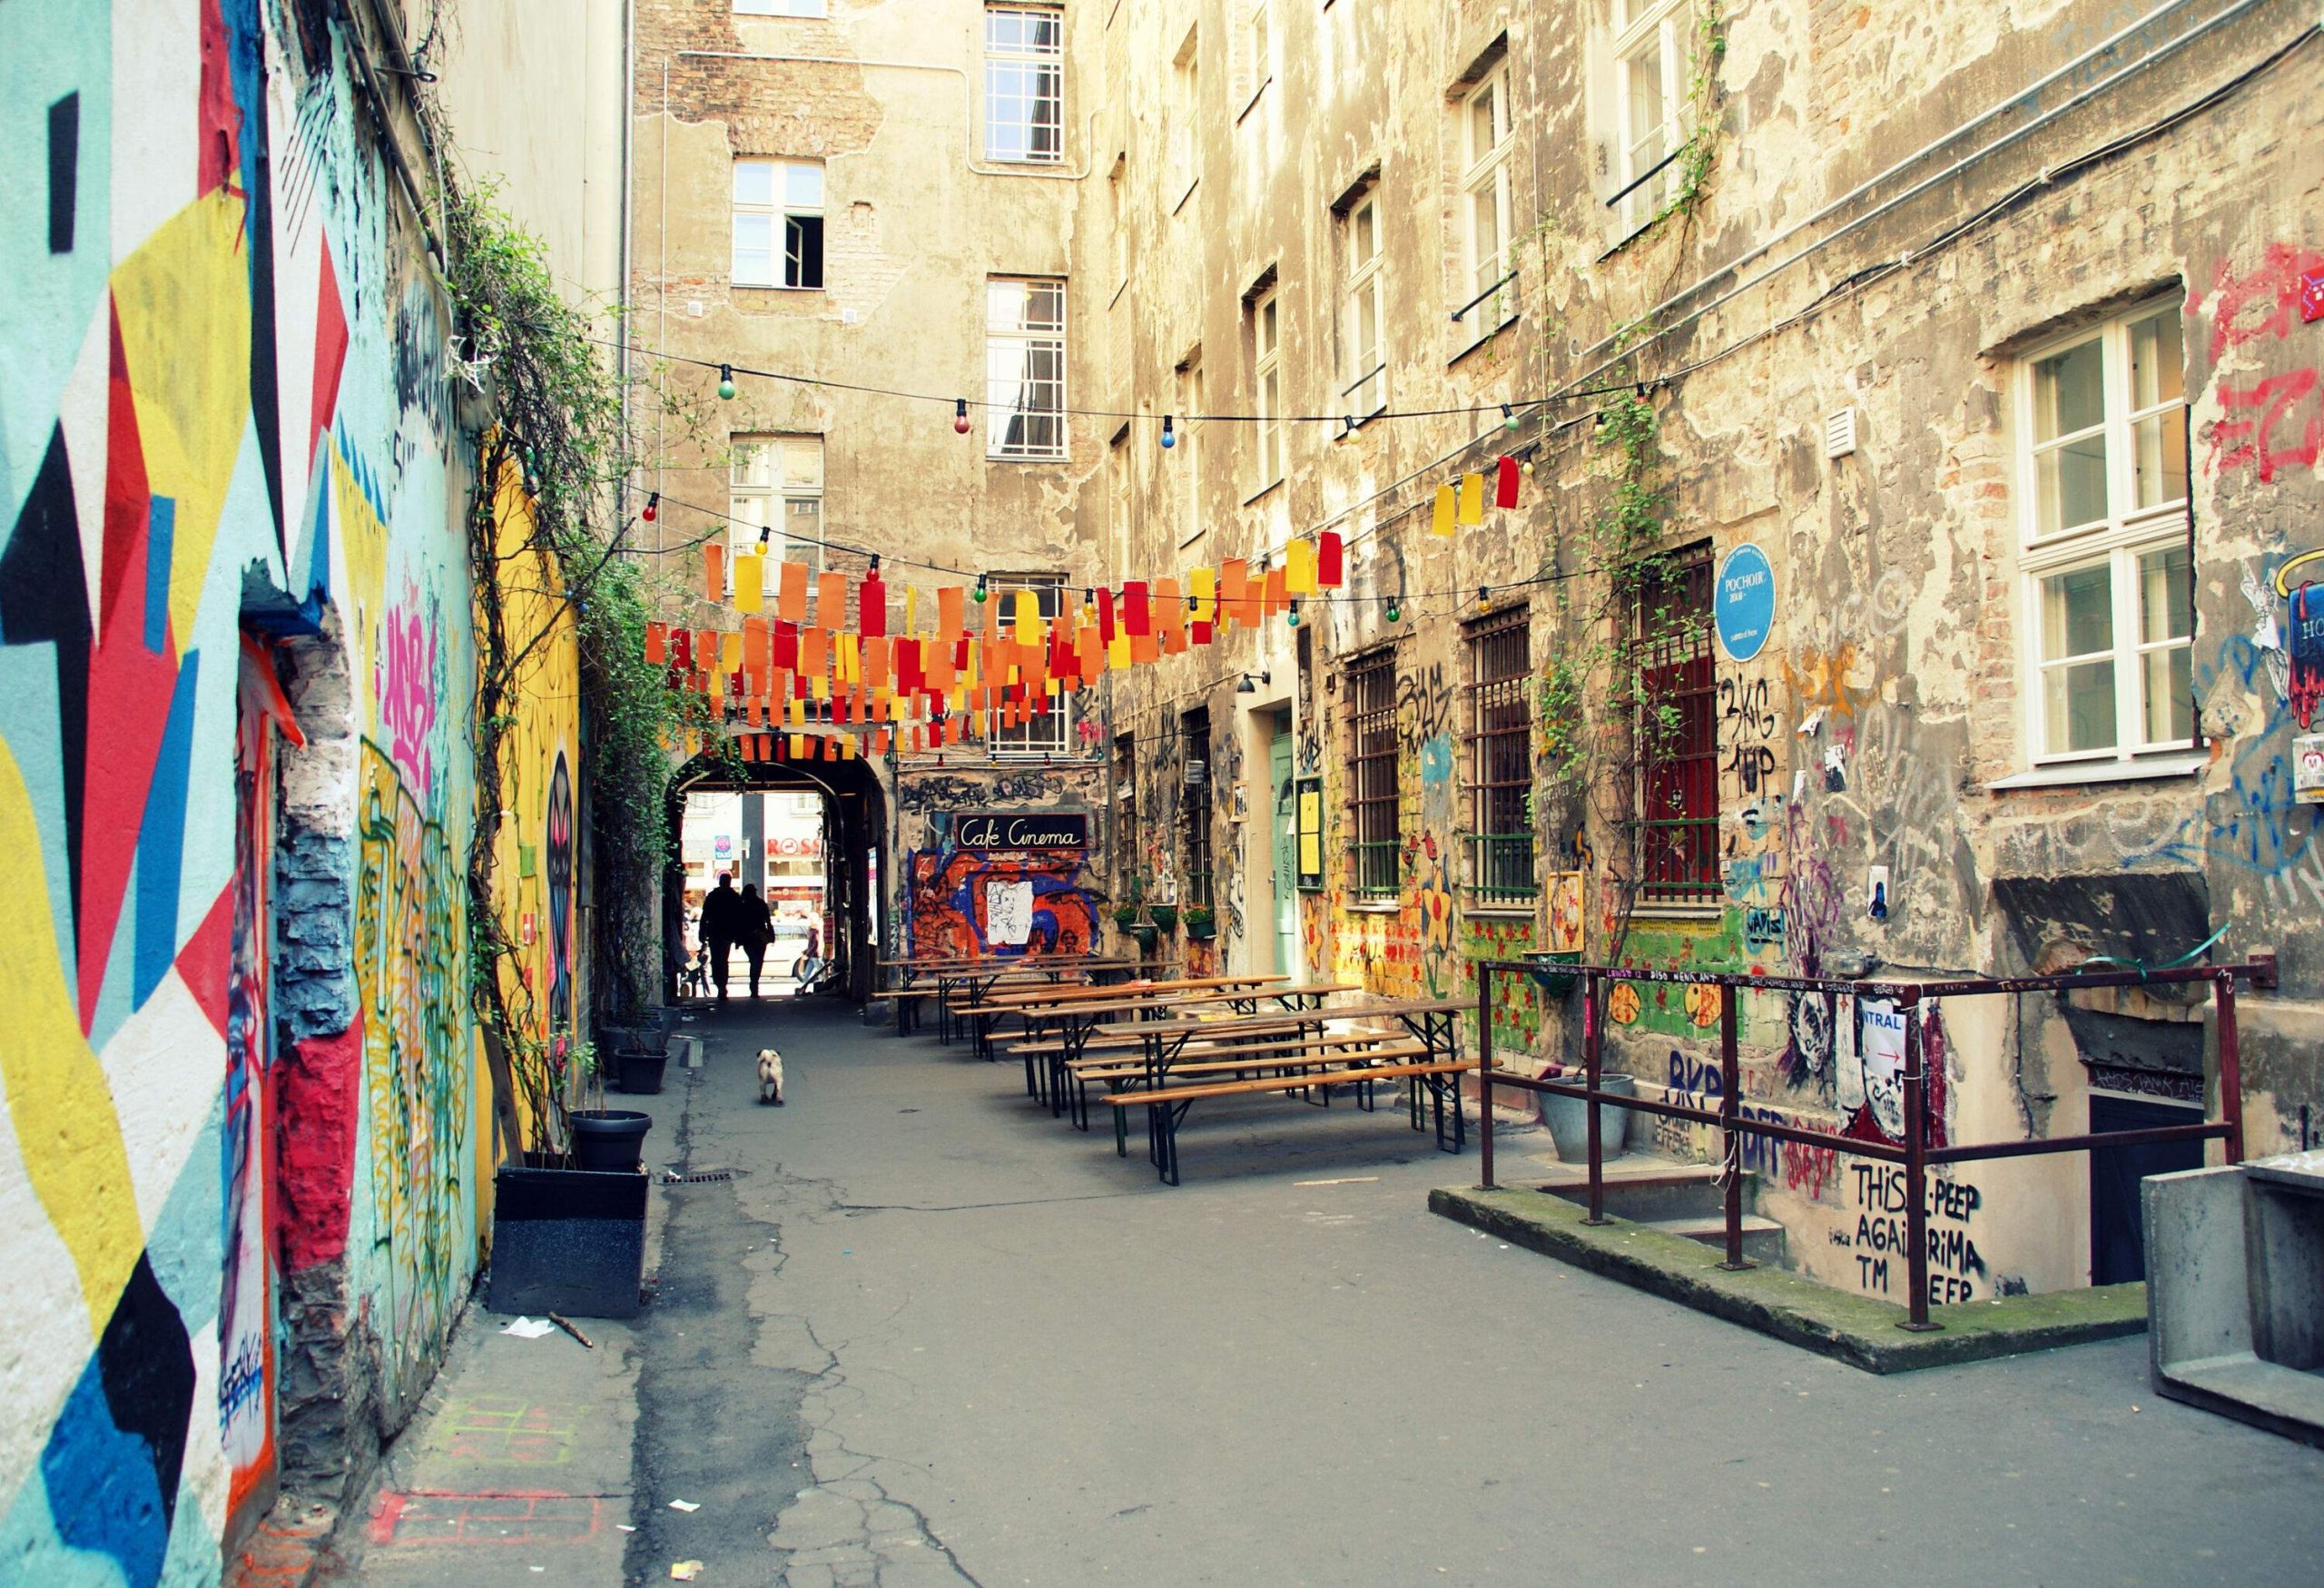 A narrow alley with outdoor picnic tables under hanging festival banners between tall and old buildings.